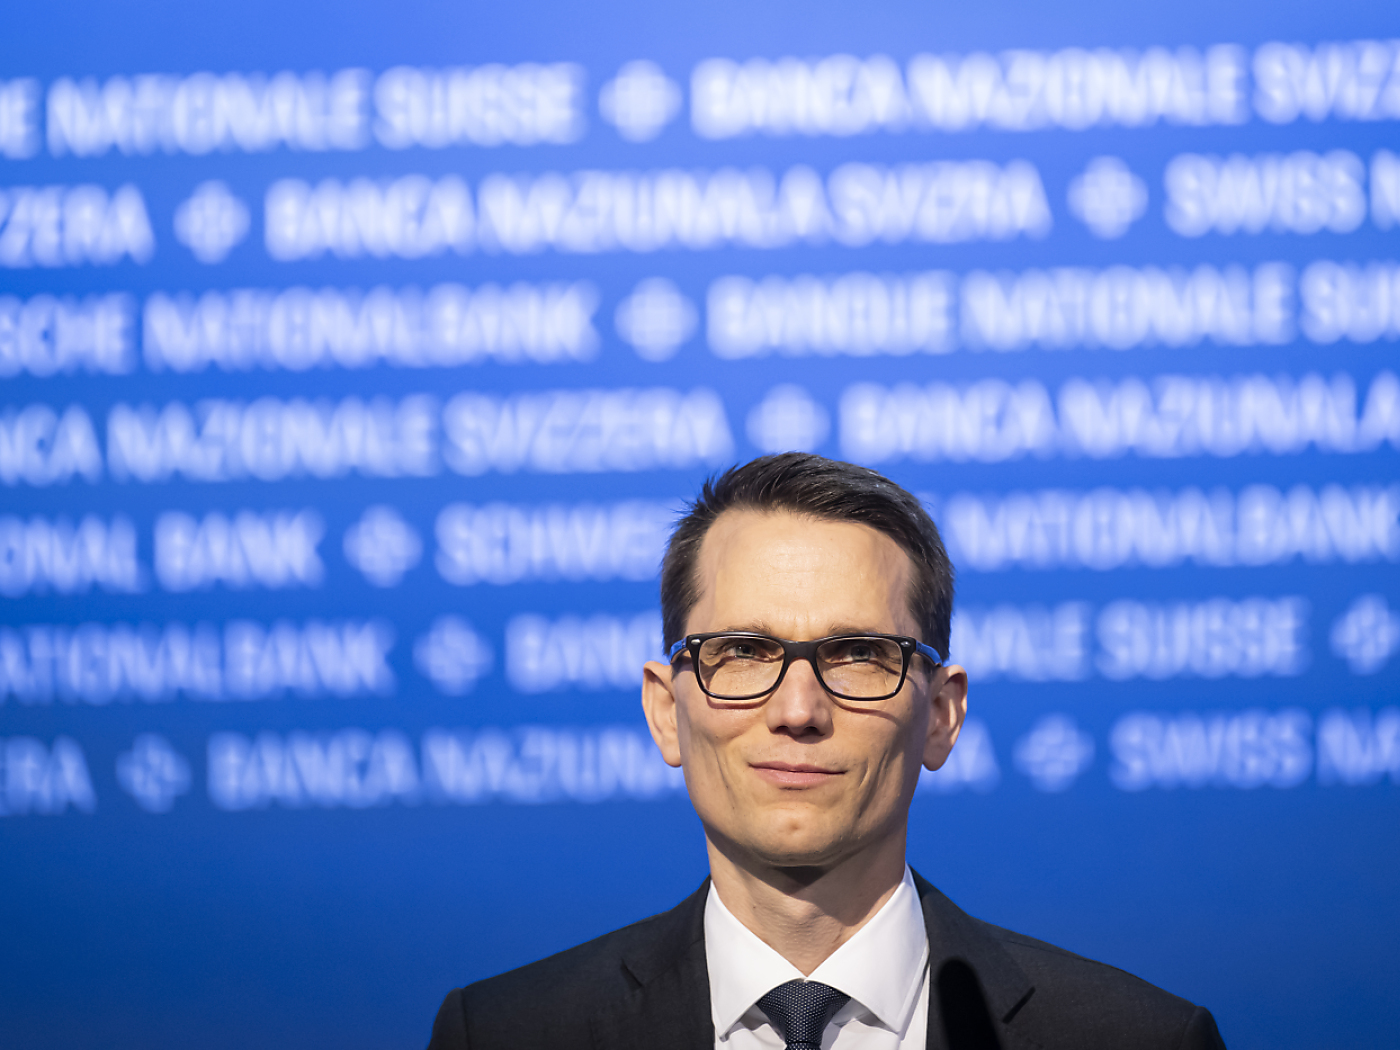 Federal Council appoints Martin Schlegel as new SNB Chairman